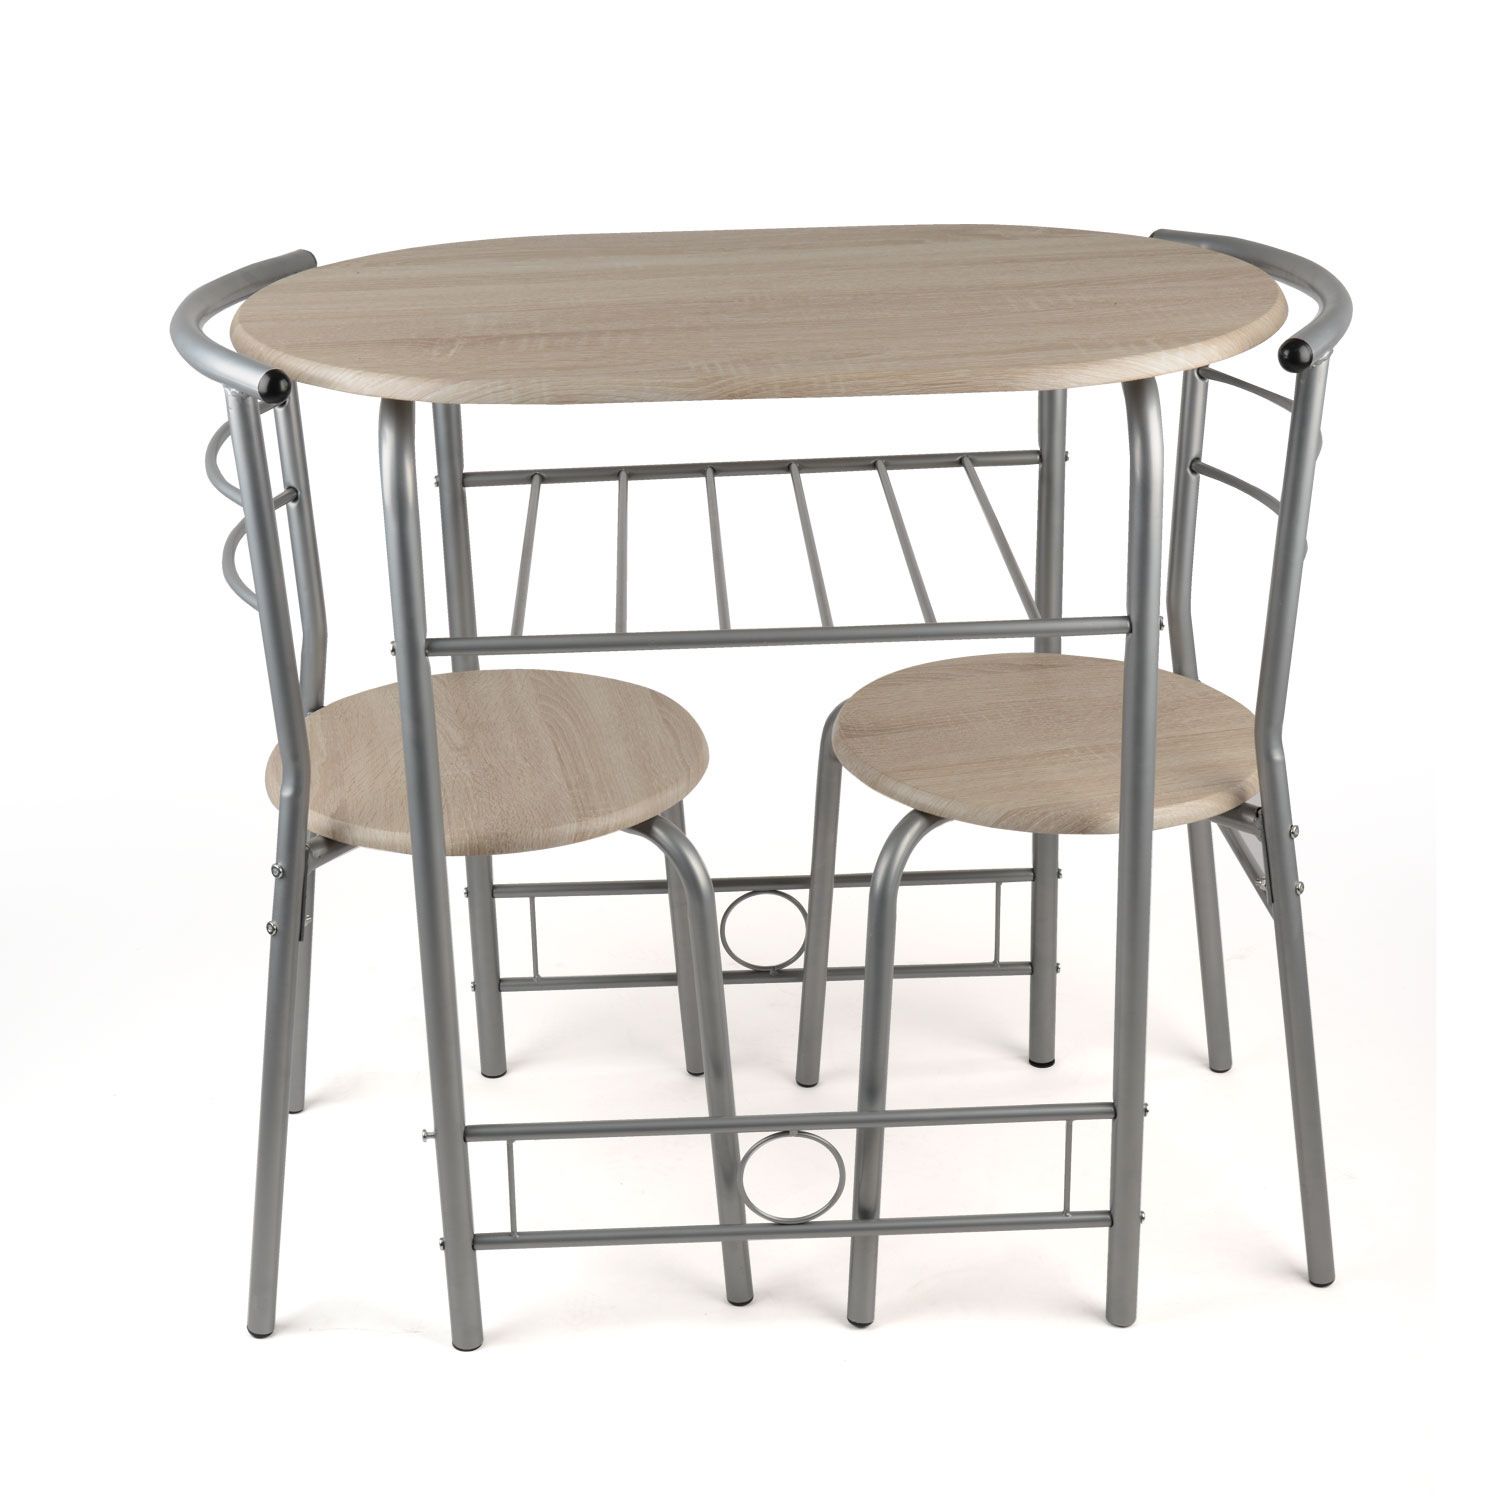 3 Piece Breakfast Table Set & 3 Piece Dining Set Bar Stools Pub With Most Recently Released 3 Piece Breakfast Dining Sets (View 13 of 20)